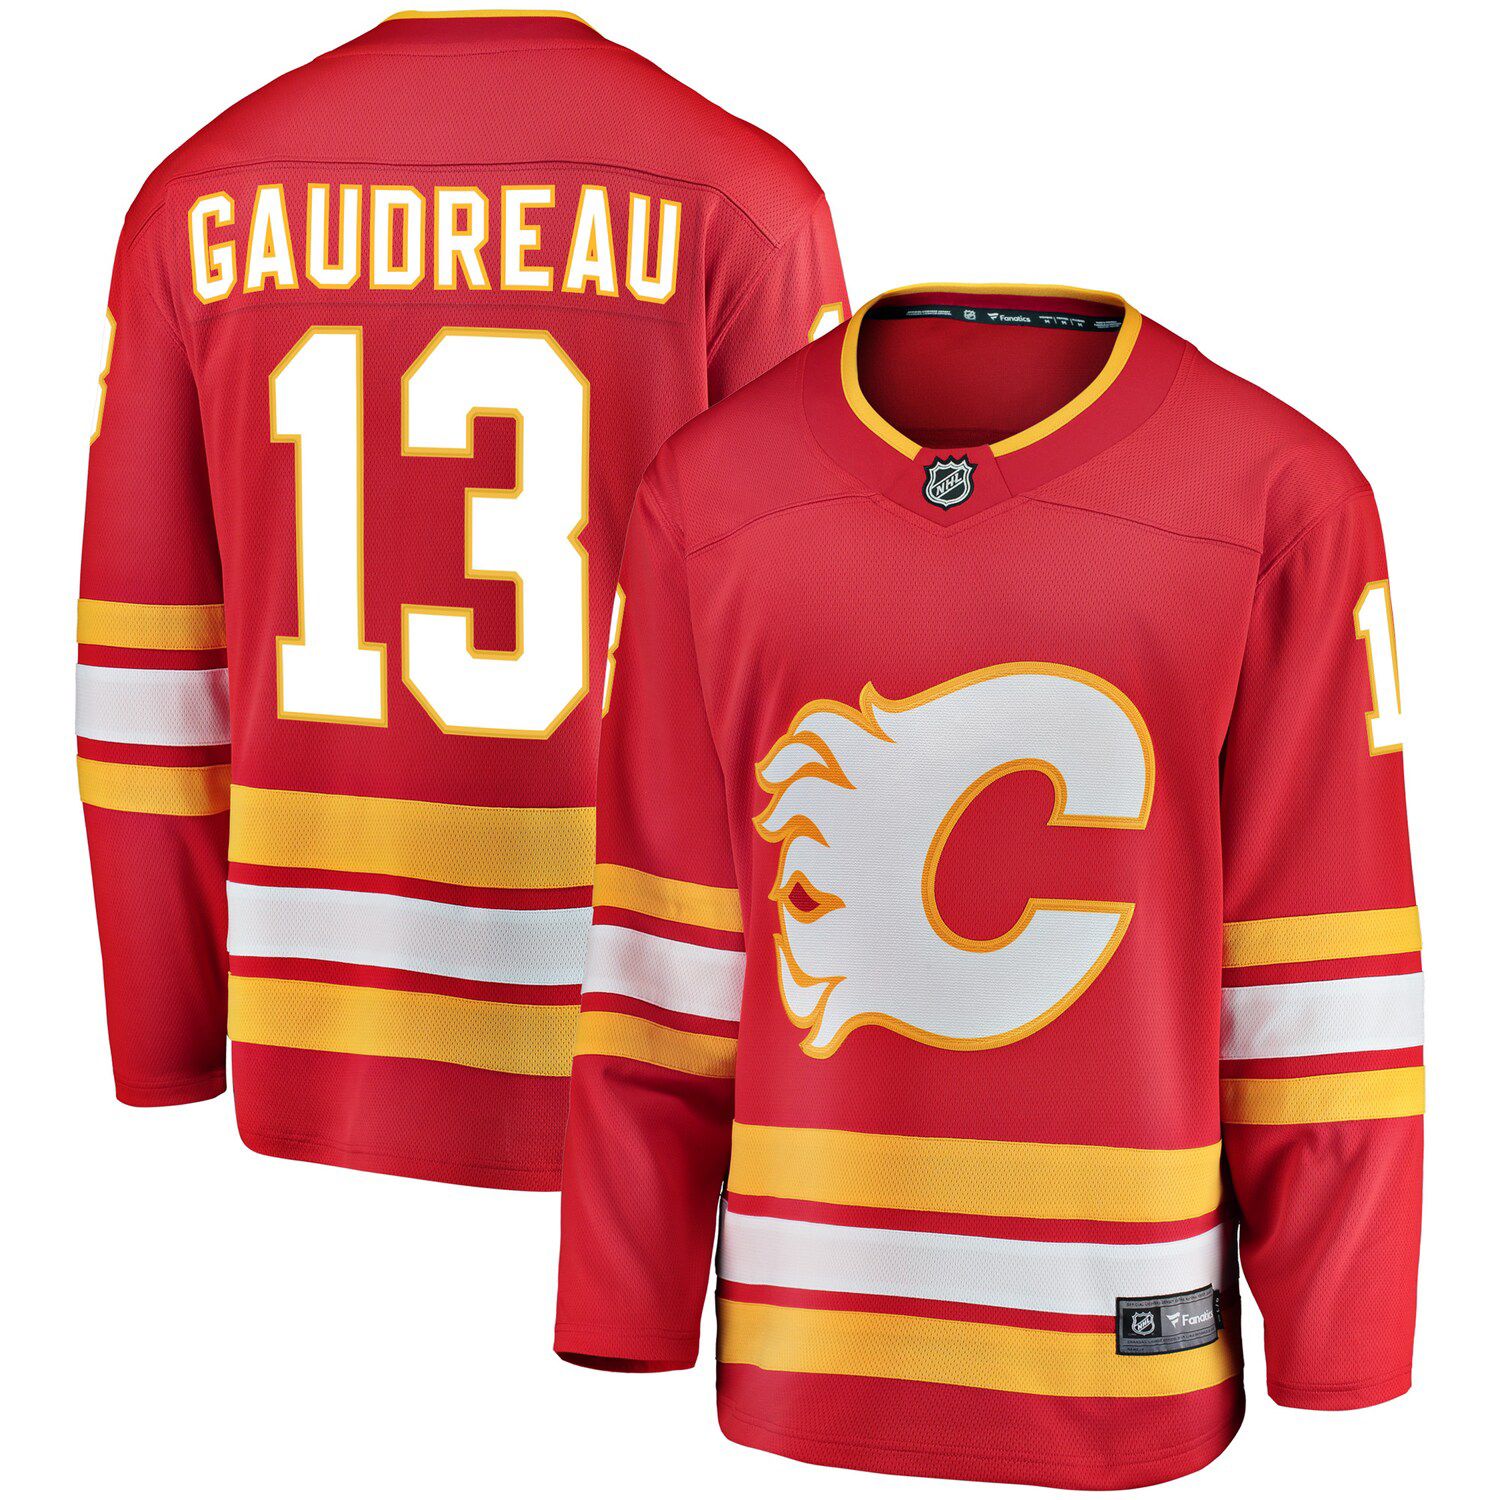 johnny gaudreau jersey for sale